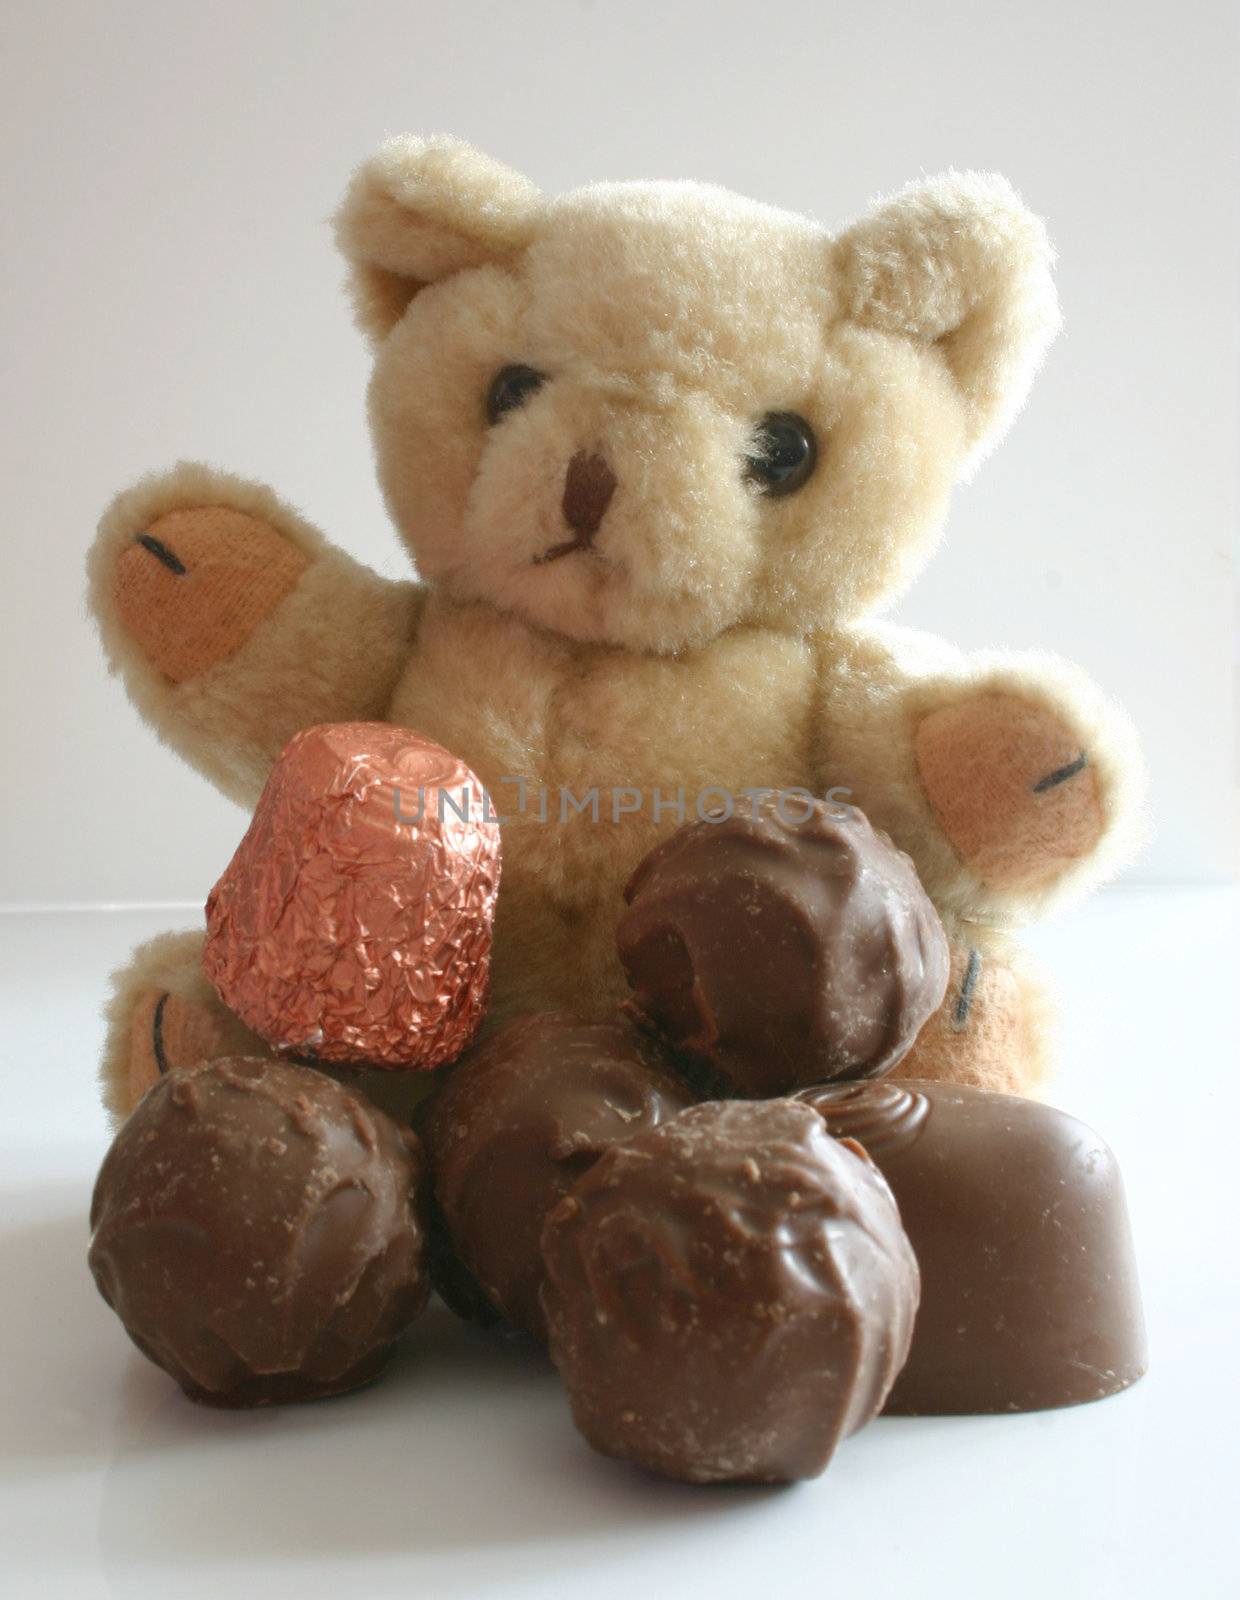 teddy with a pile of chocolates in front of it